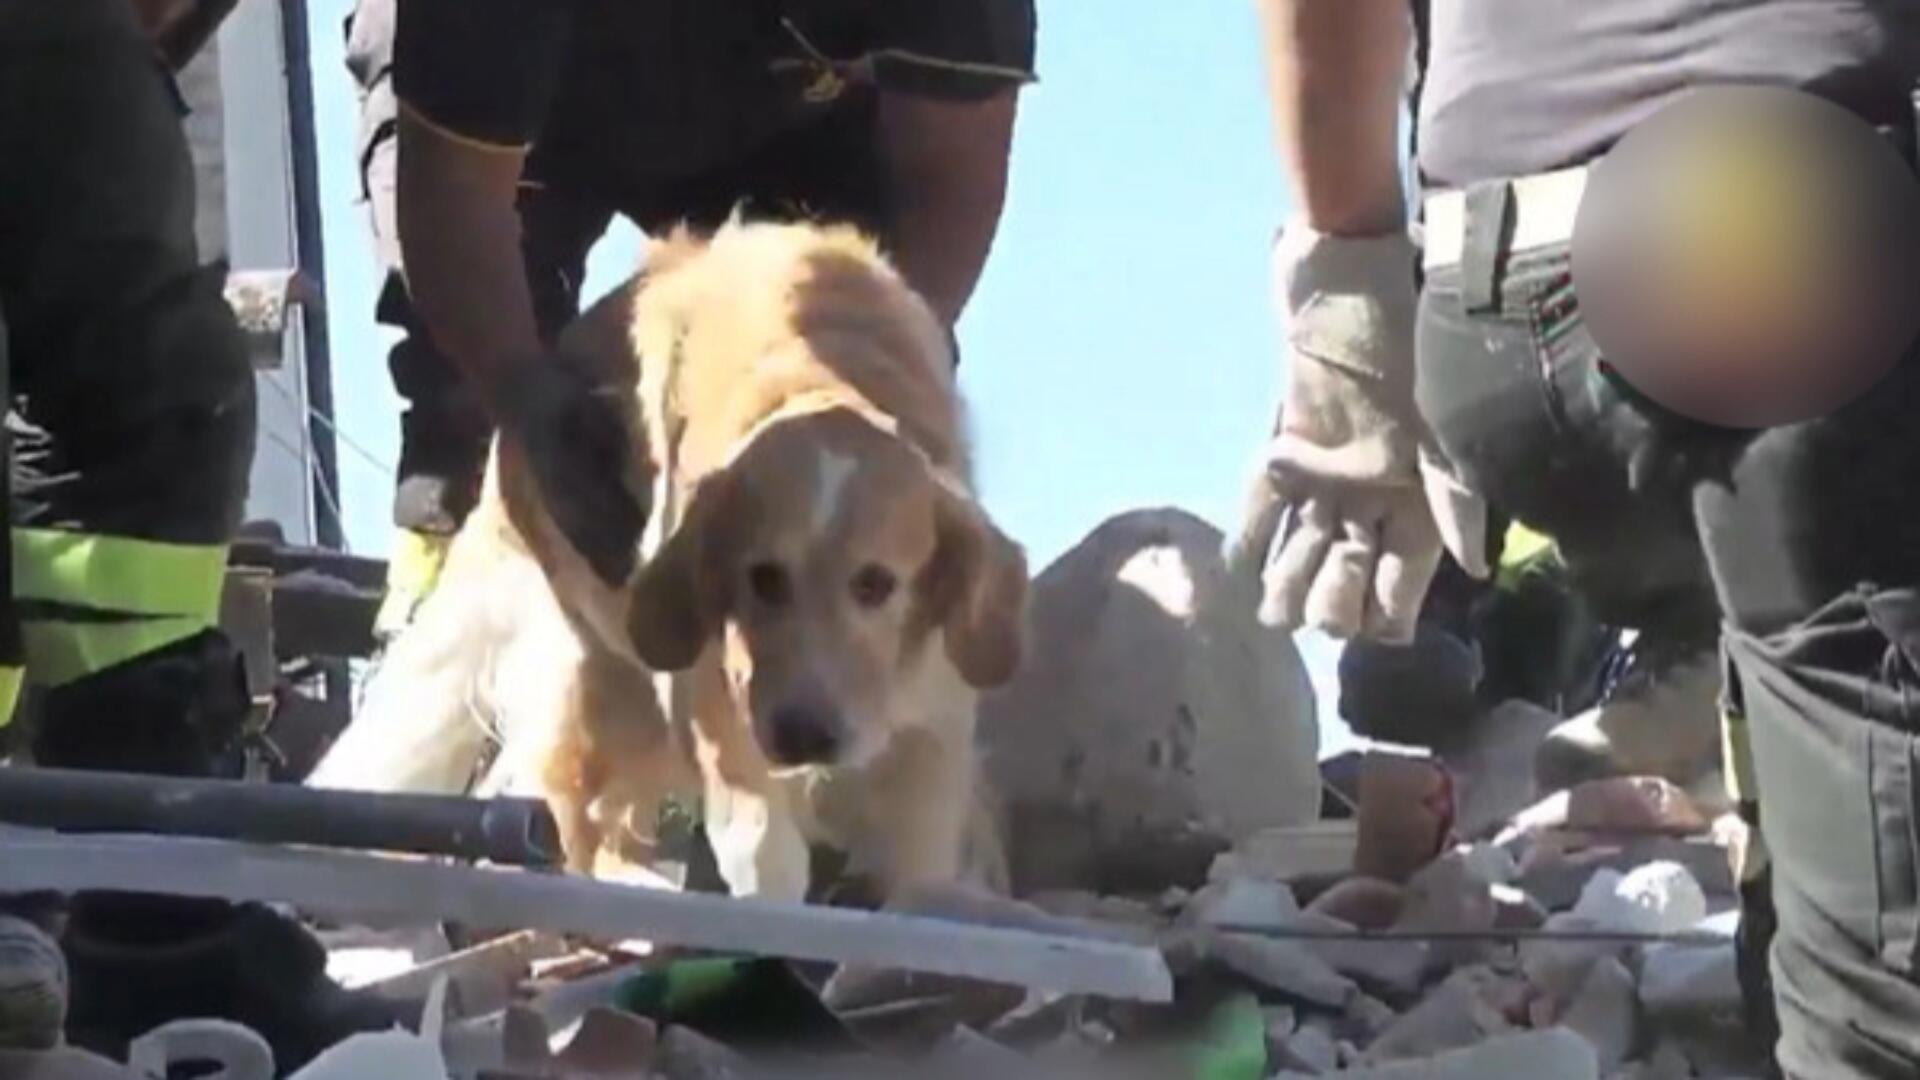 Italy earthquake reconstruction miracle hound survived 9 days later
